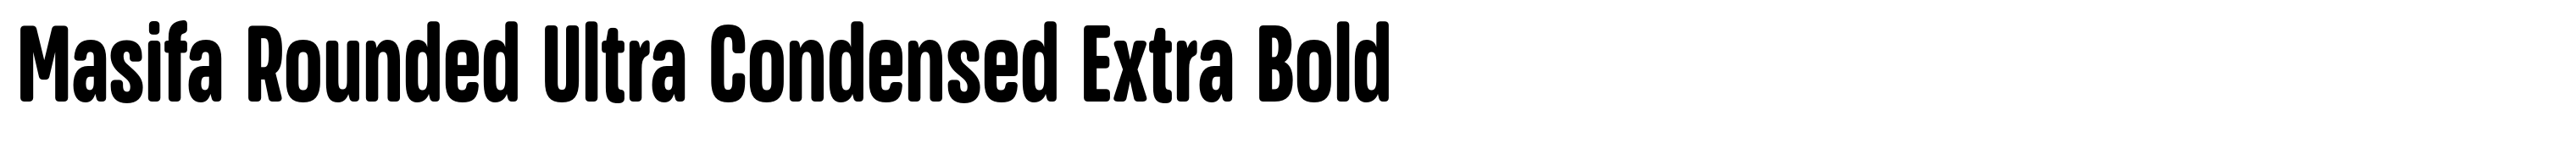 Masifa Rounded Ultra Condensed Extra Bold